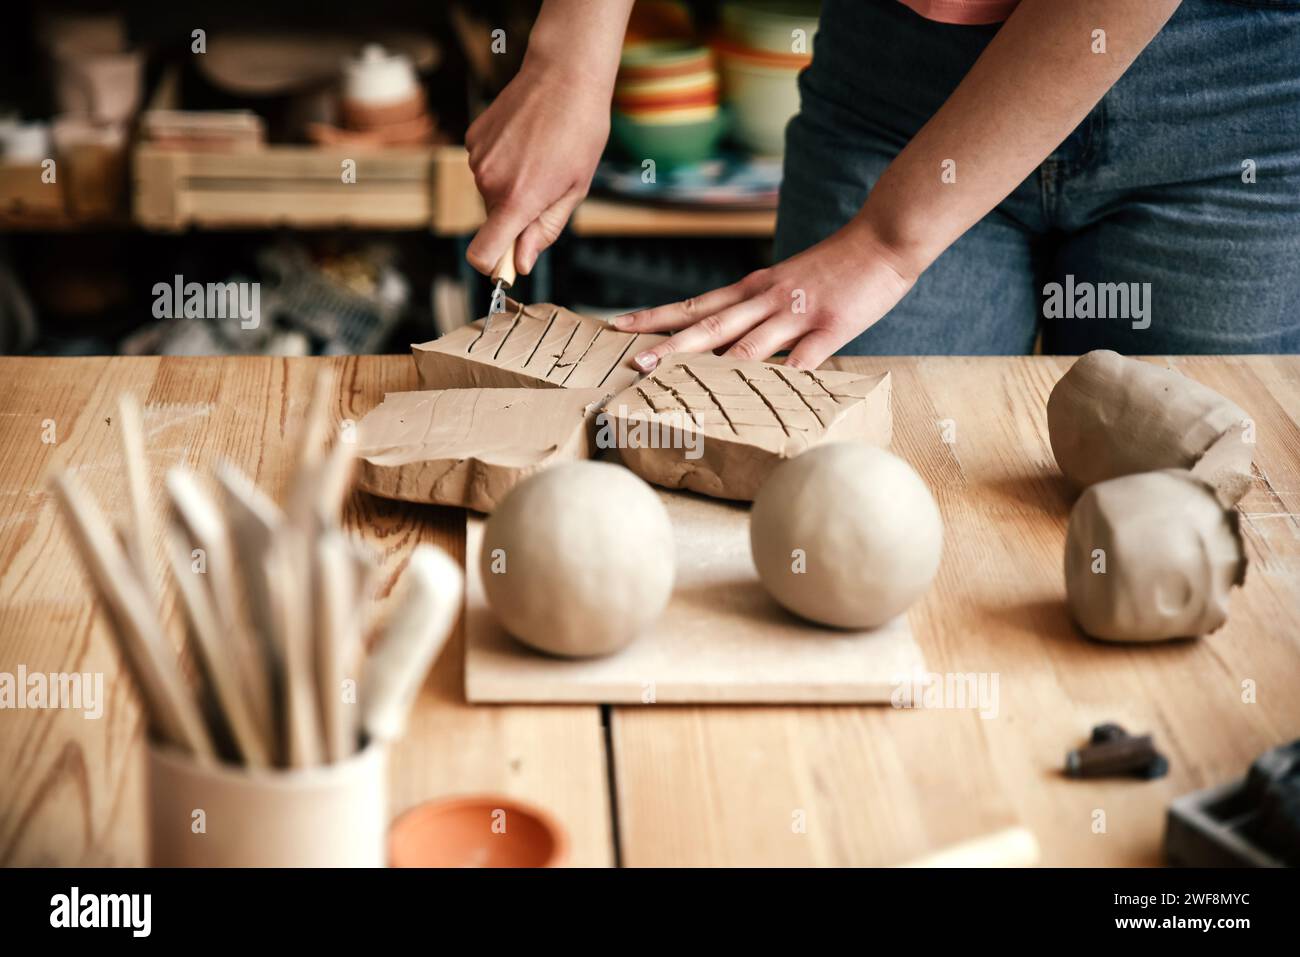 Potter cuts piece of clay with knife to soften it. Stock Photo